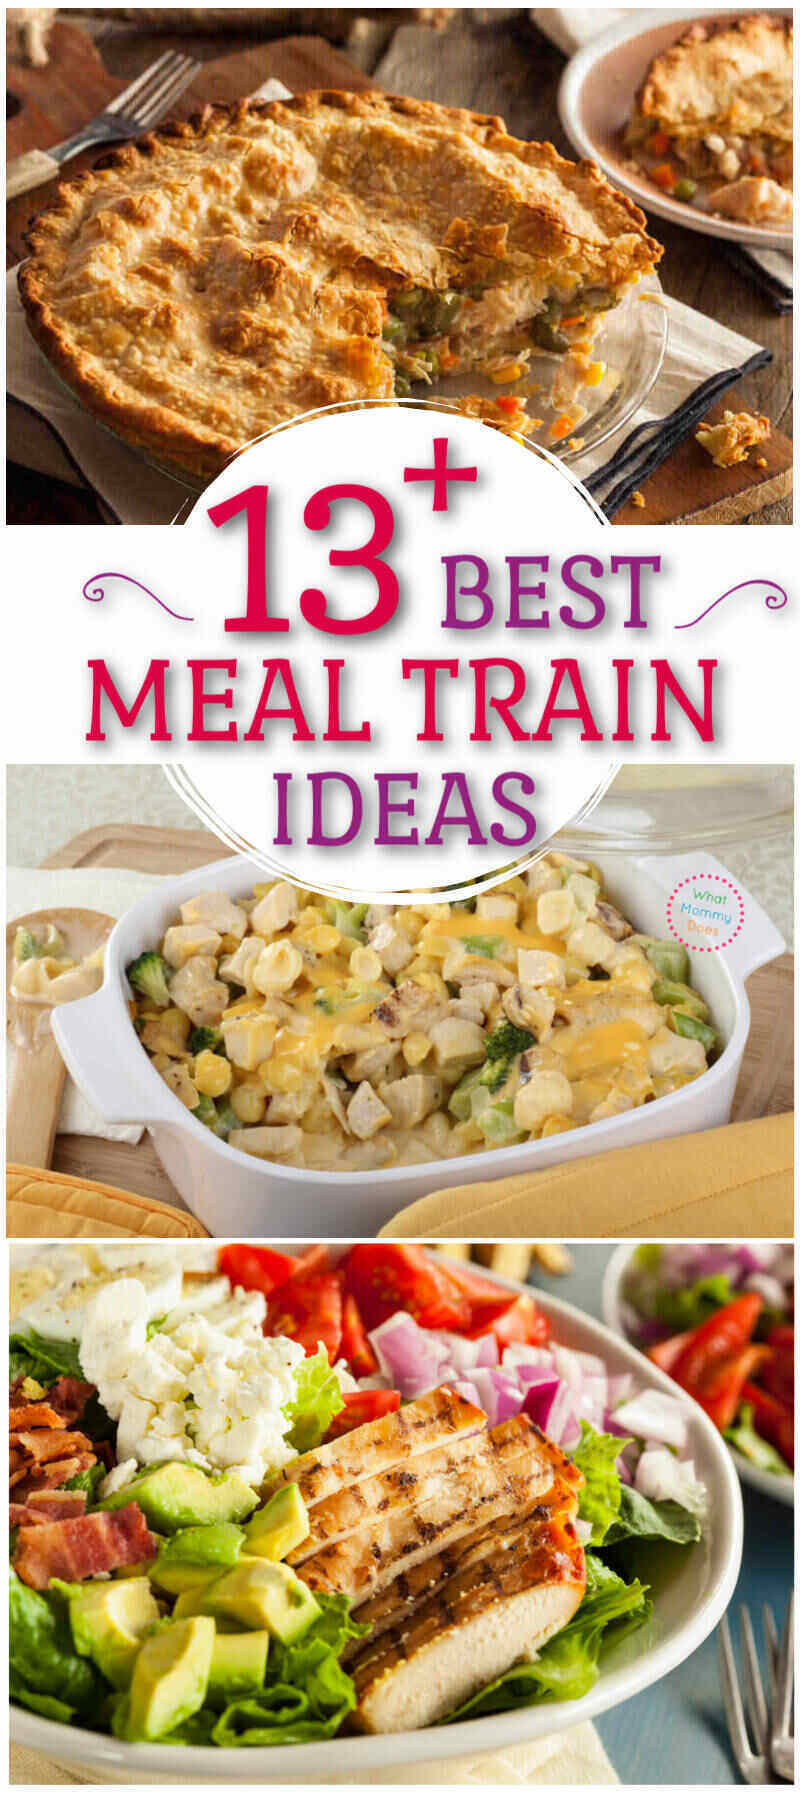 How to Write Heartfelt Meal Train Thank Yous - Meal Train